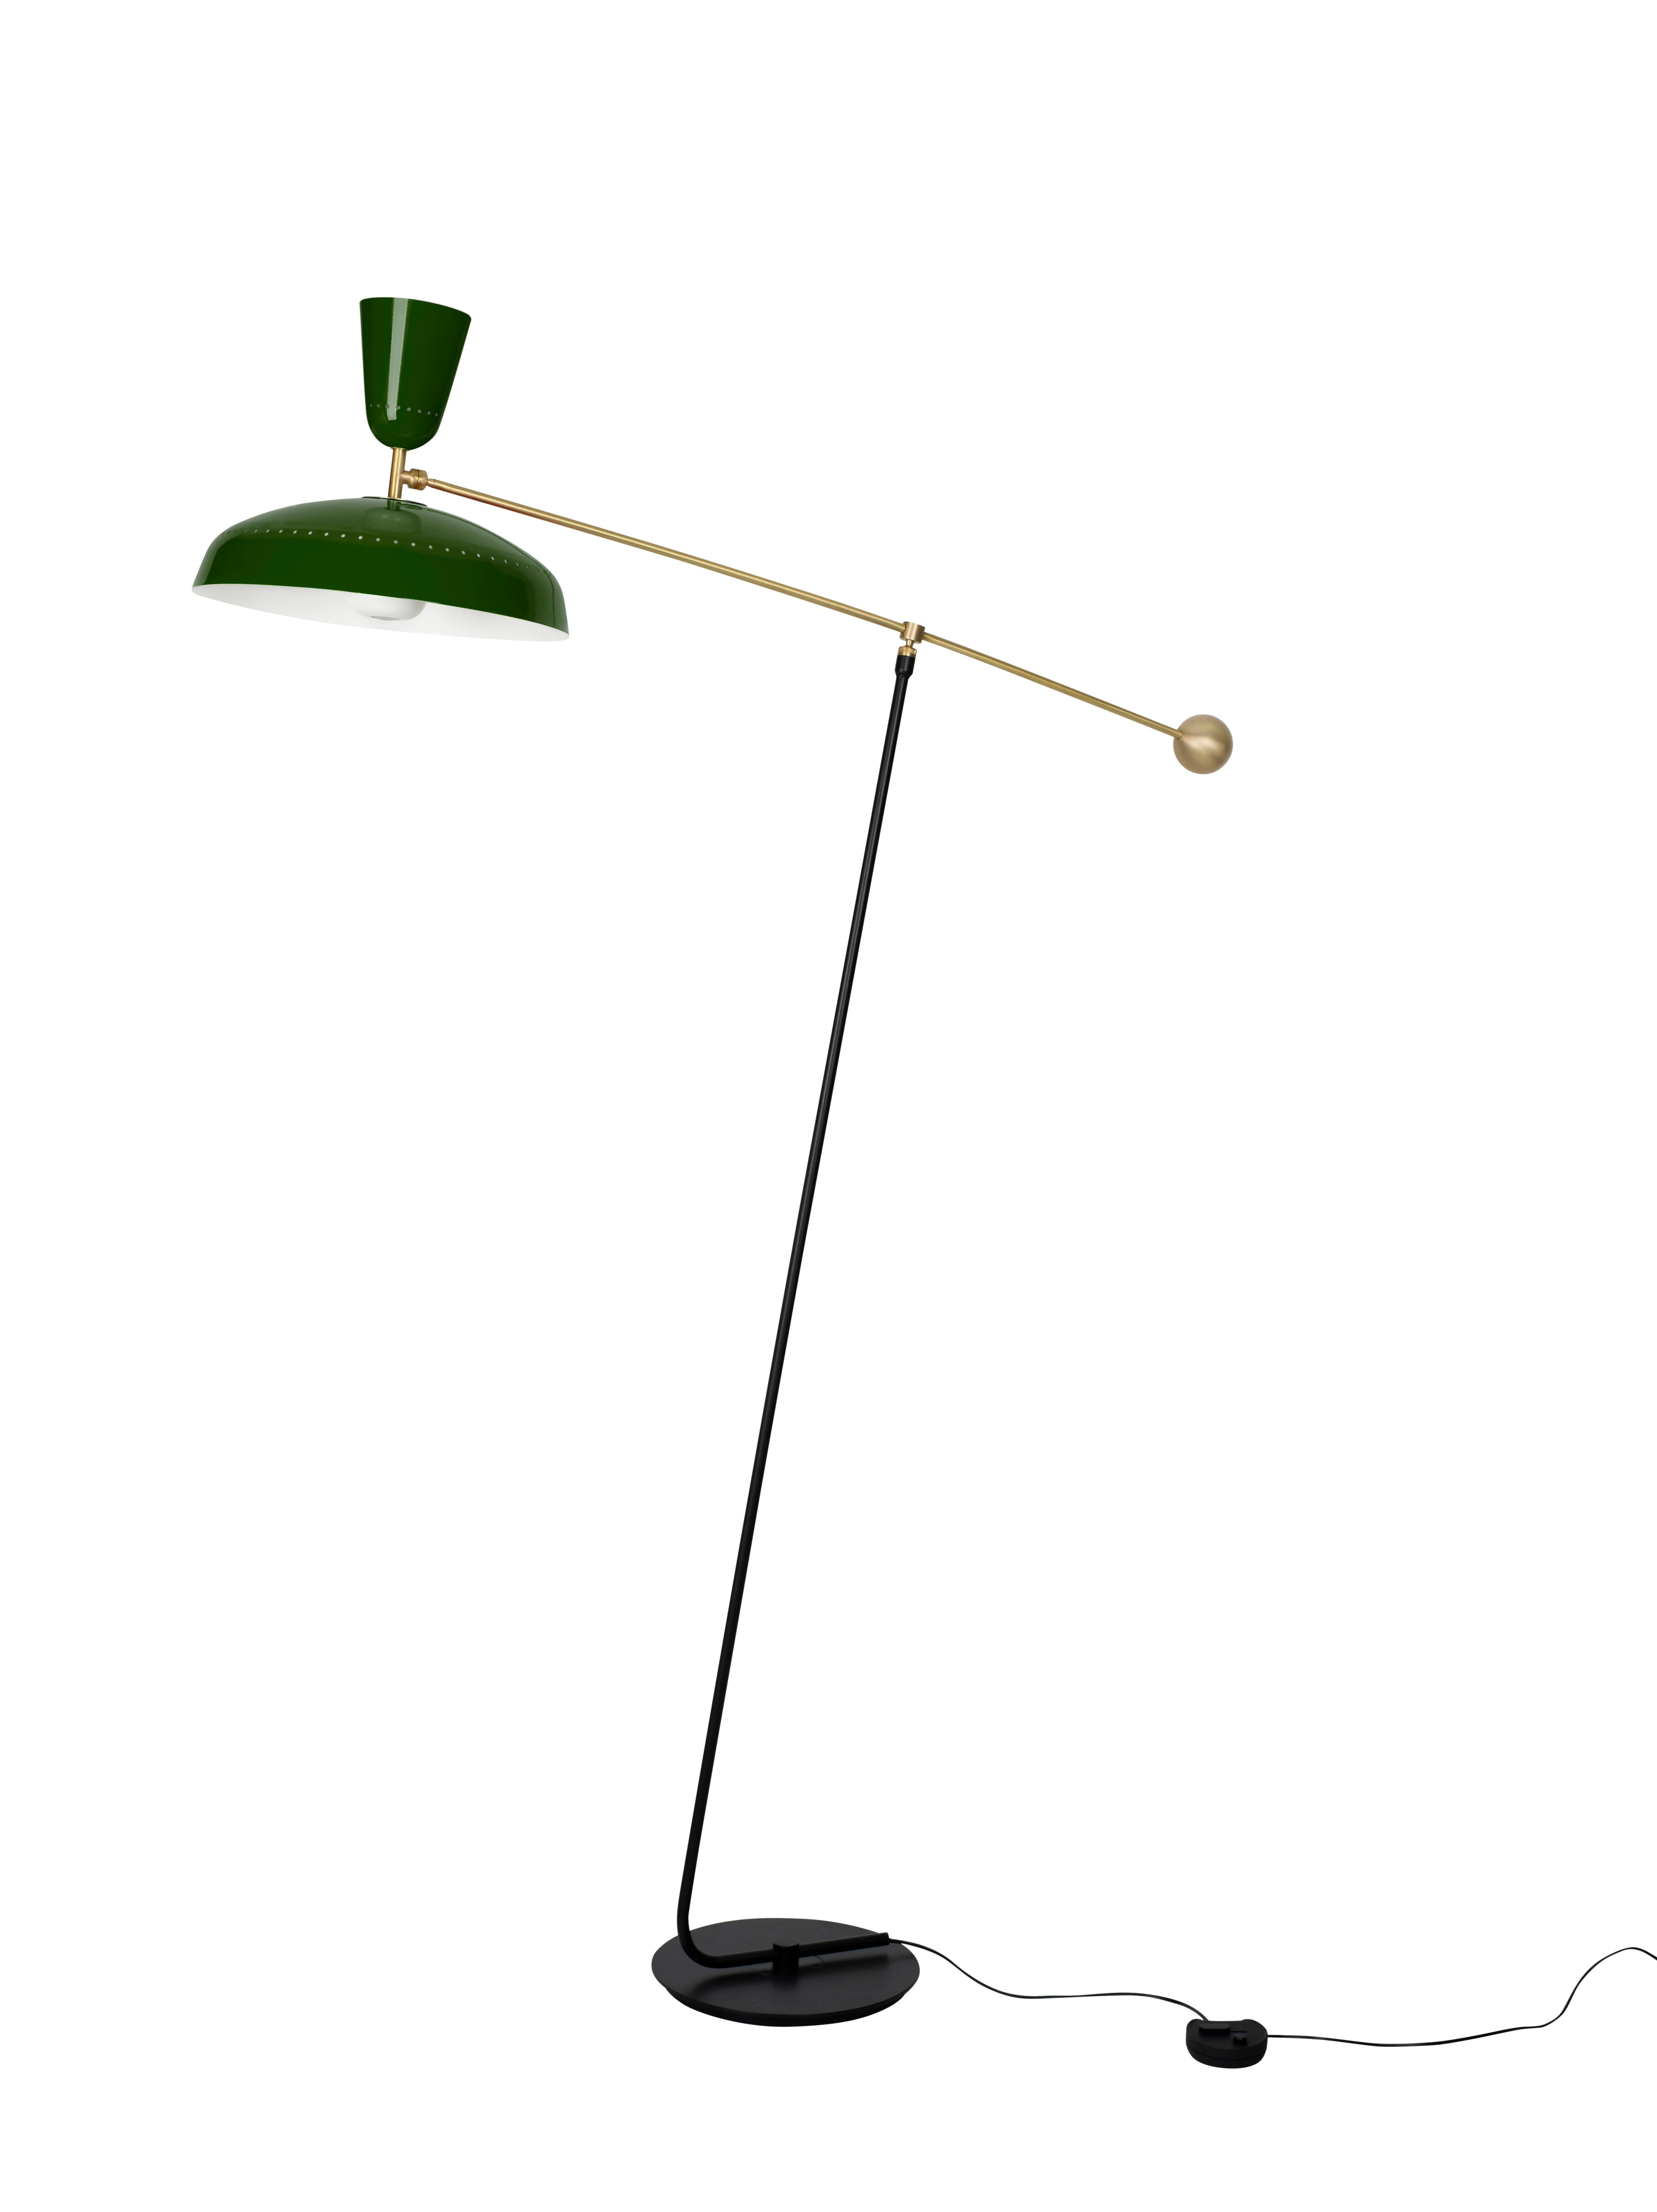 Large Pierre Guariche 'G1' Floor Lamp for Sammode Studio in Chalk For Sale 1